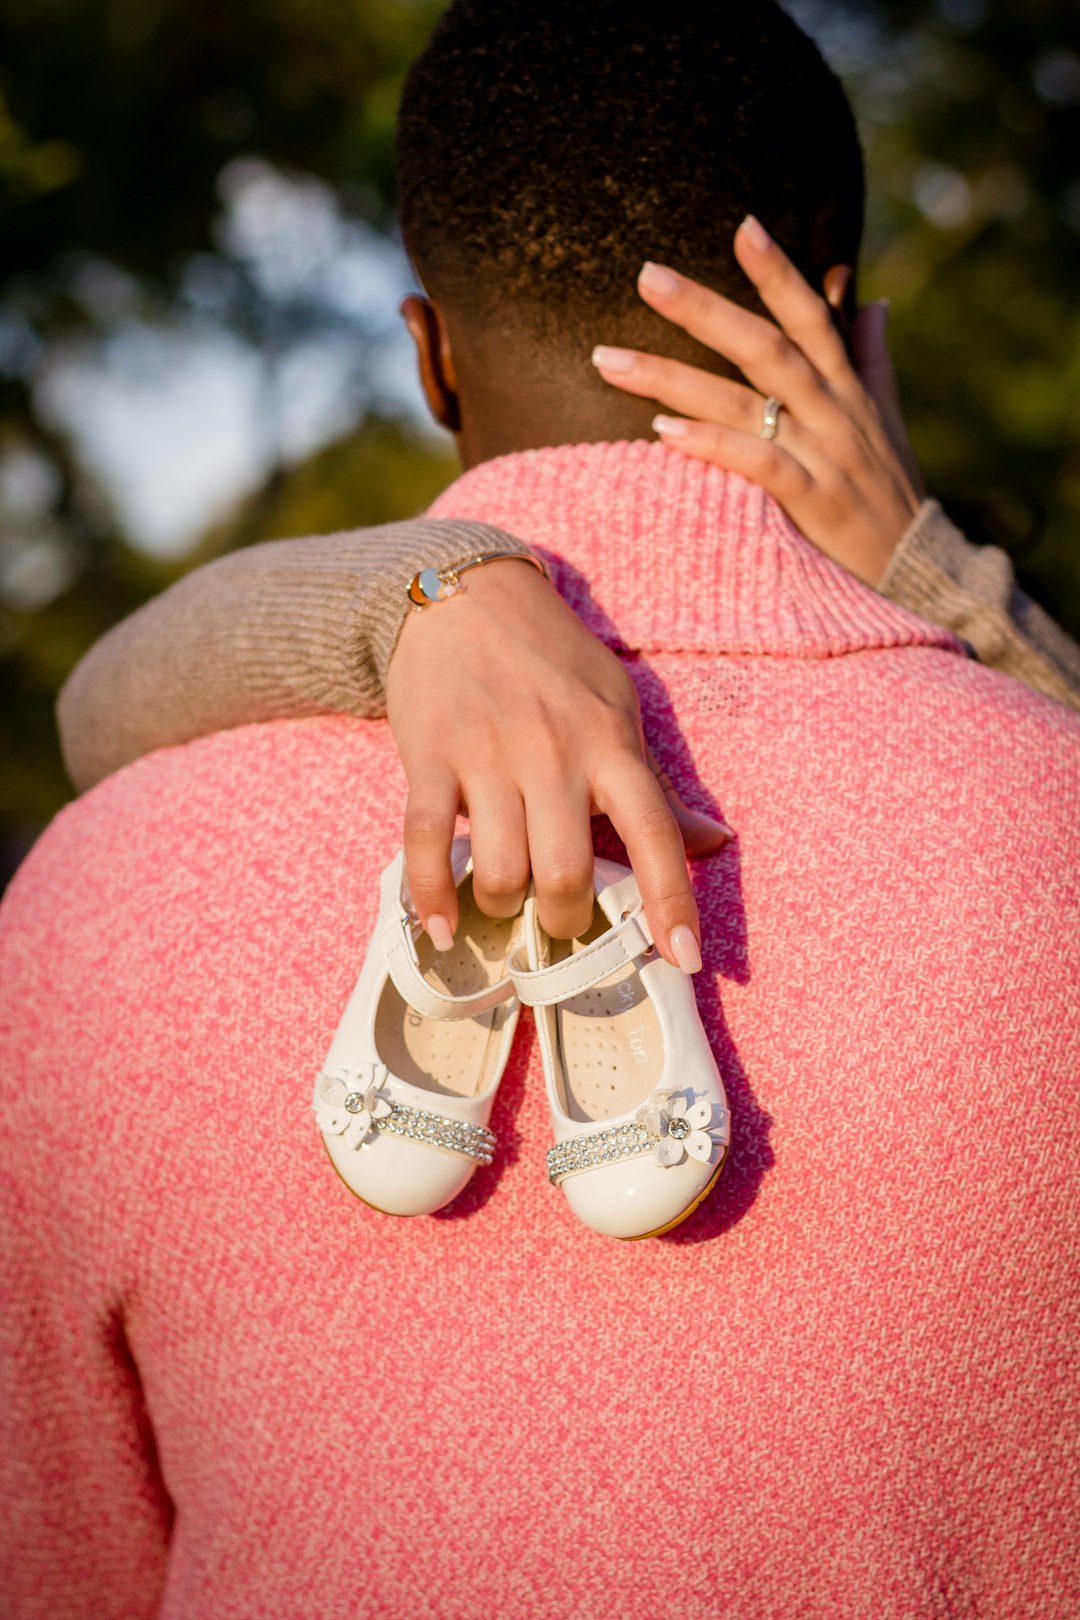 person holding baby's shoes in front of man wearing pink cardigan